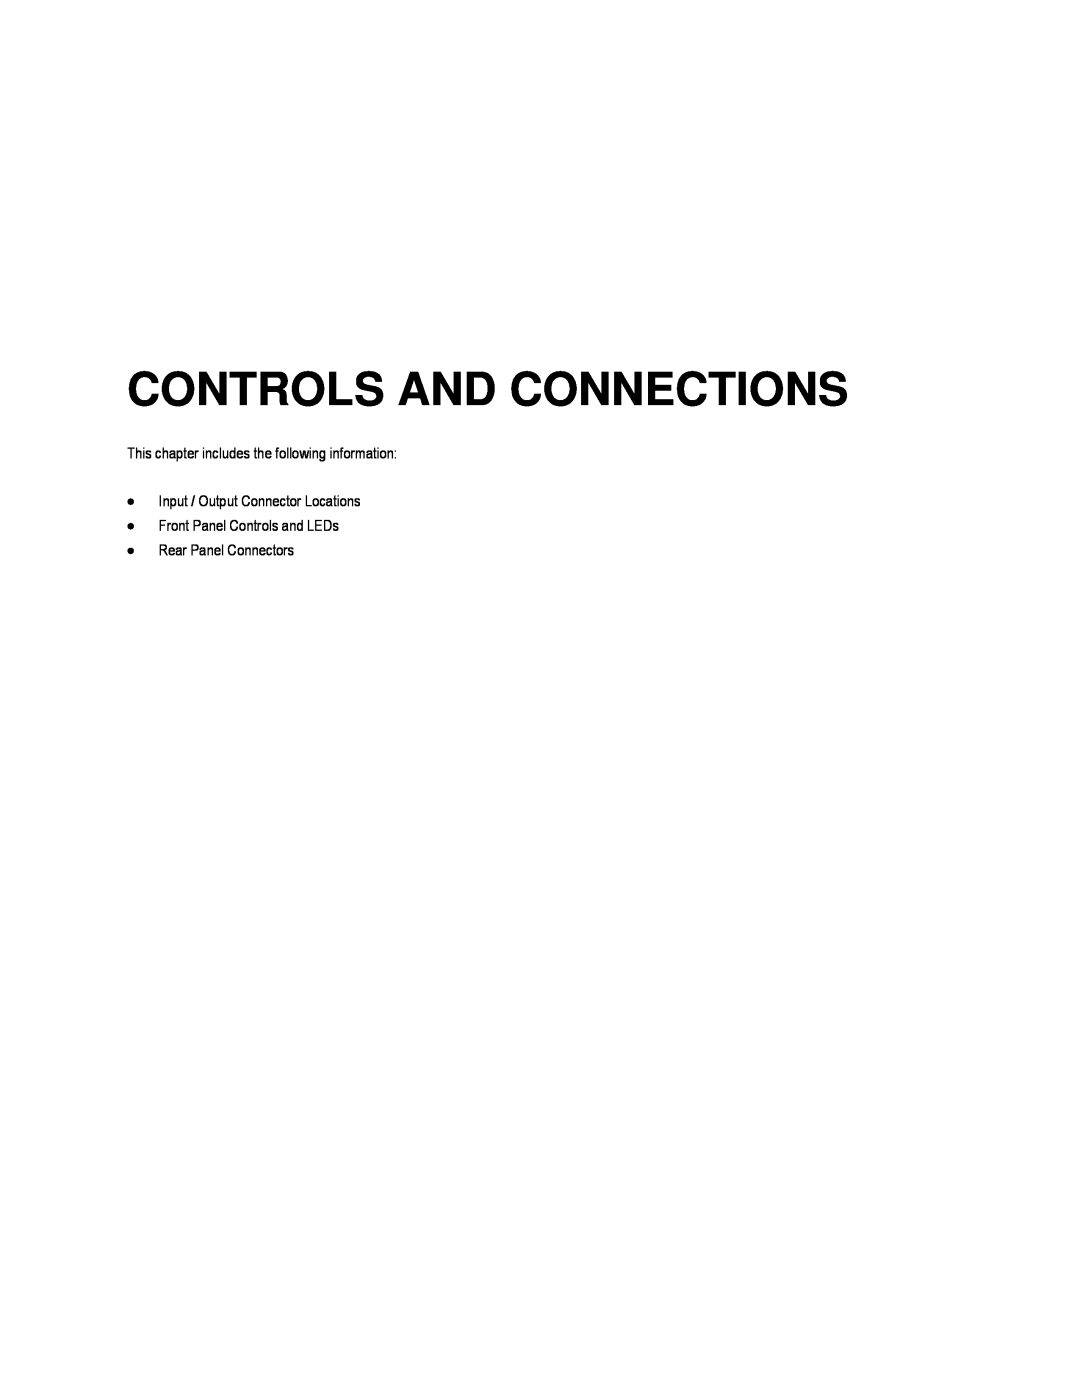 Toshiba EVR16-X, EVR8-X Controls And Connections, This chapter includes the following information, Rear Panel Connectors 